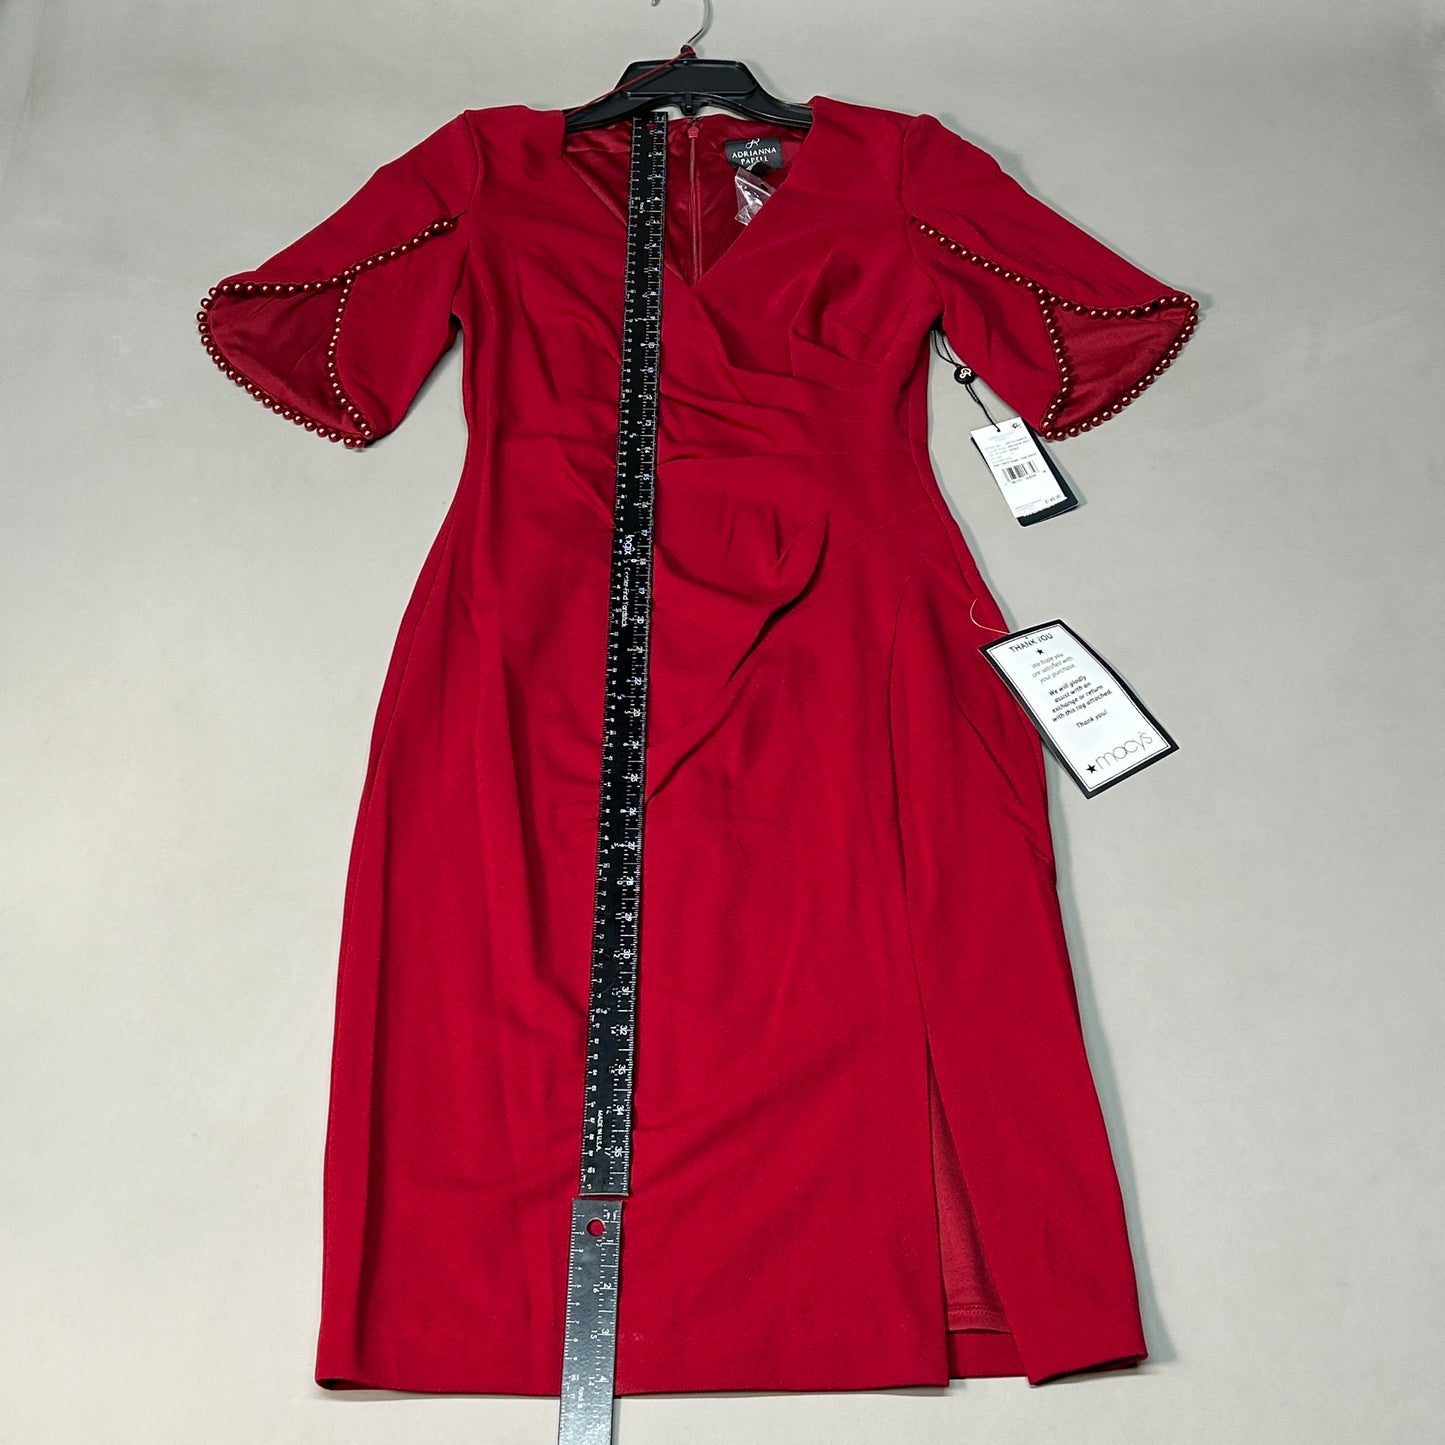 ADRIANNA PAPELL Knit Crepe Pearl Trim Dress Red Size 4 (New)